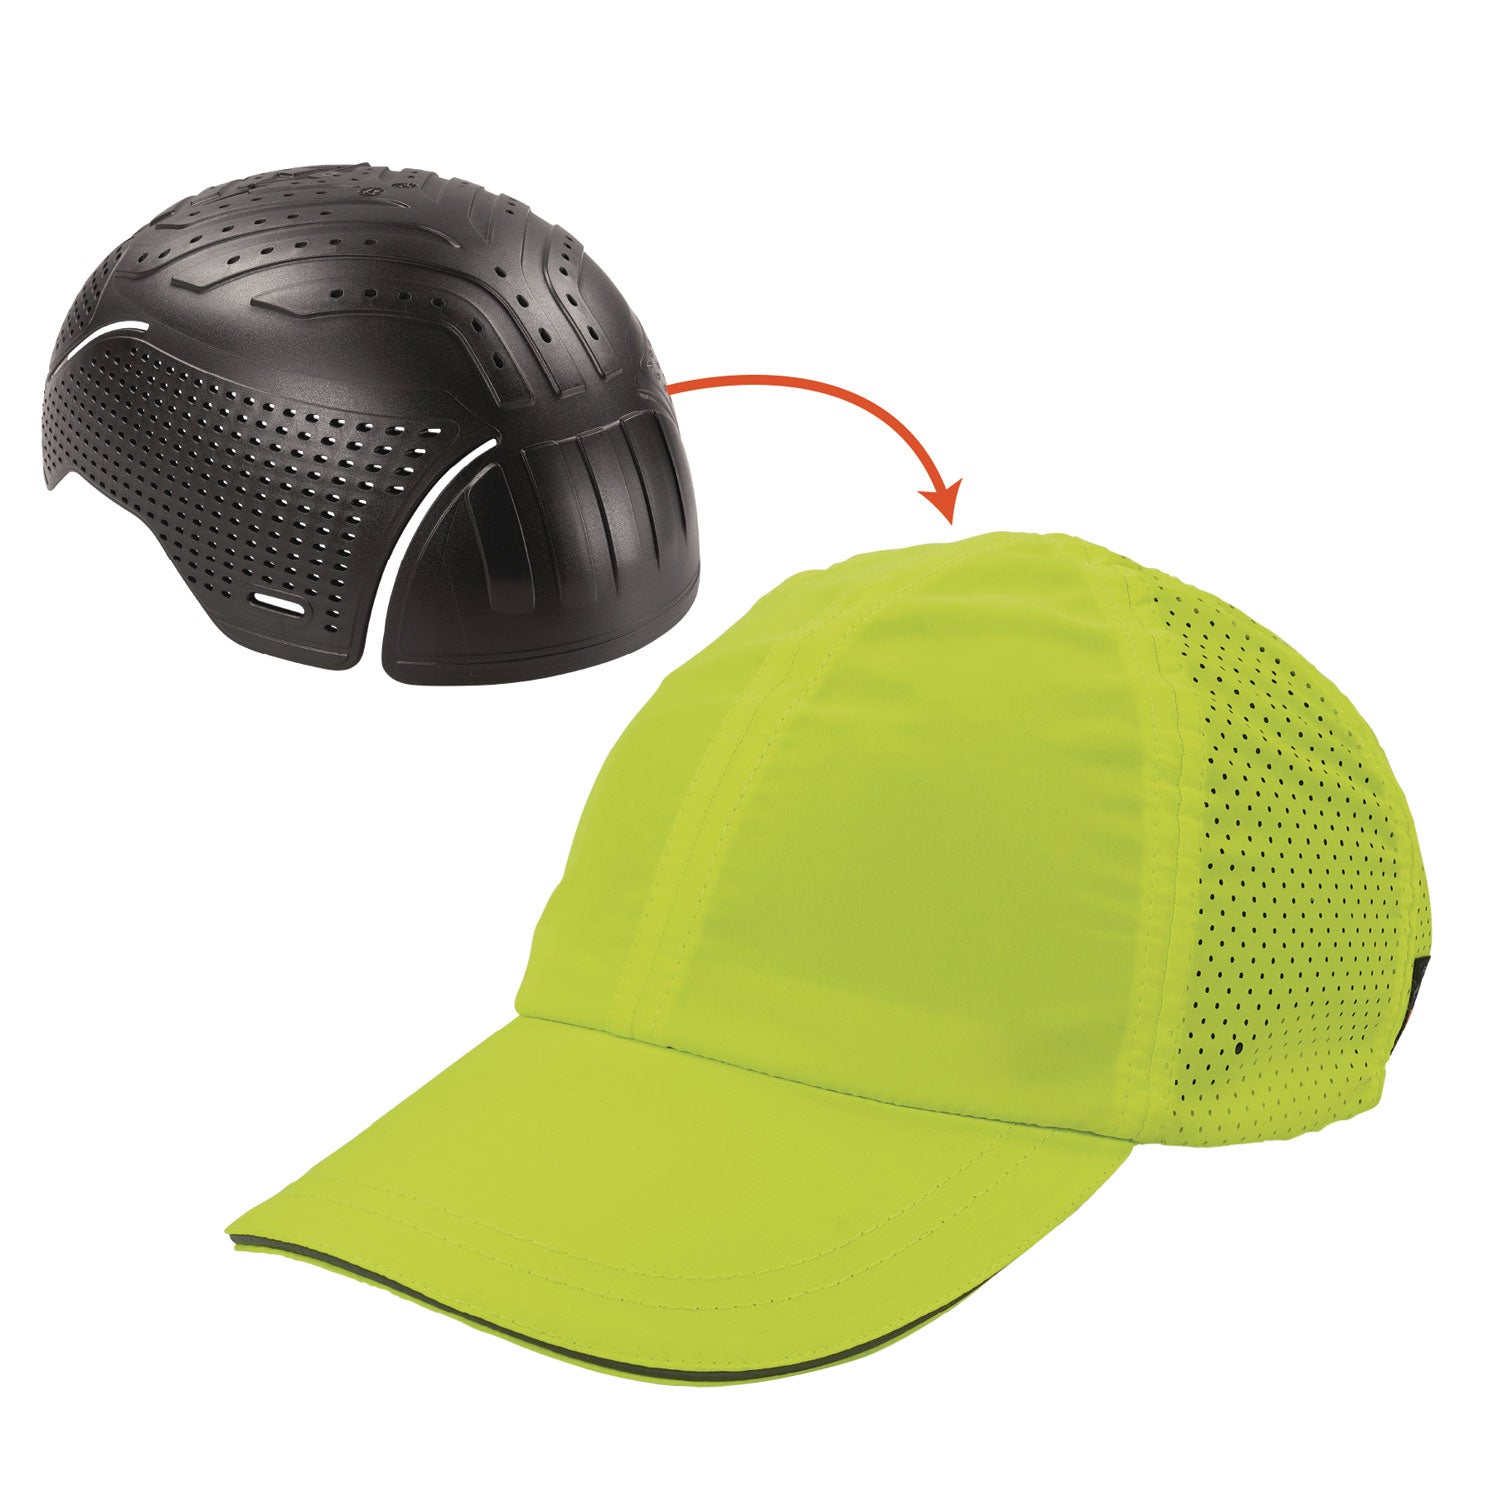 skullerz-8947-lightweight-baseball-hat-and-bump-cap-insert-x-small-small-lime-ships-in-1-3-business-days_ego23456 - 1